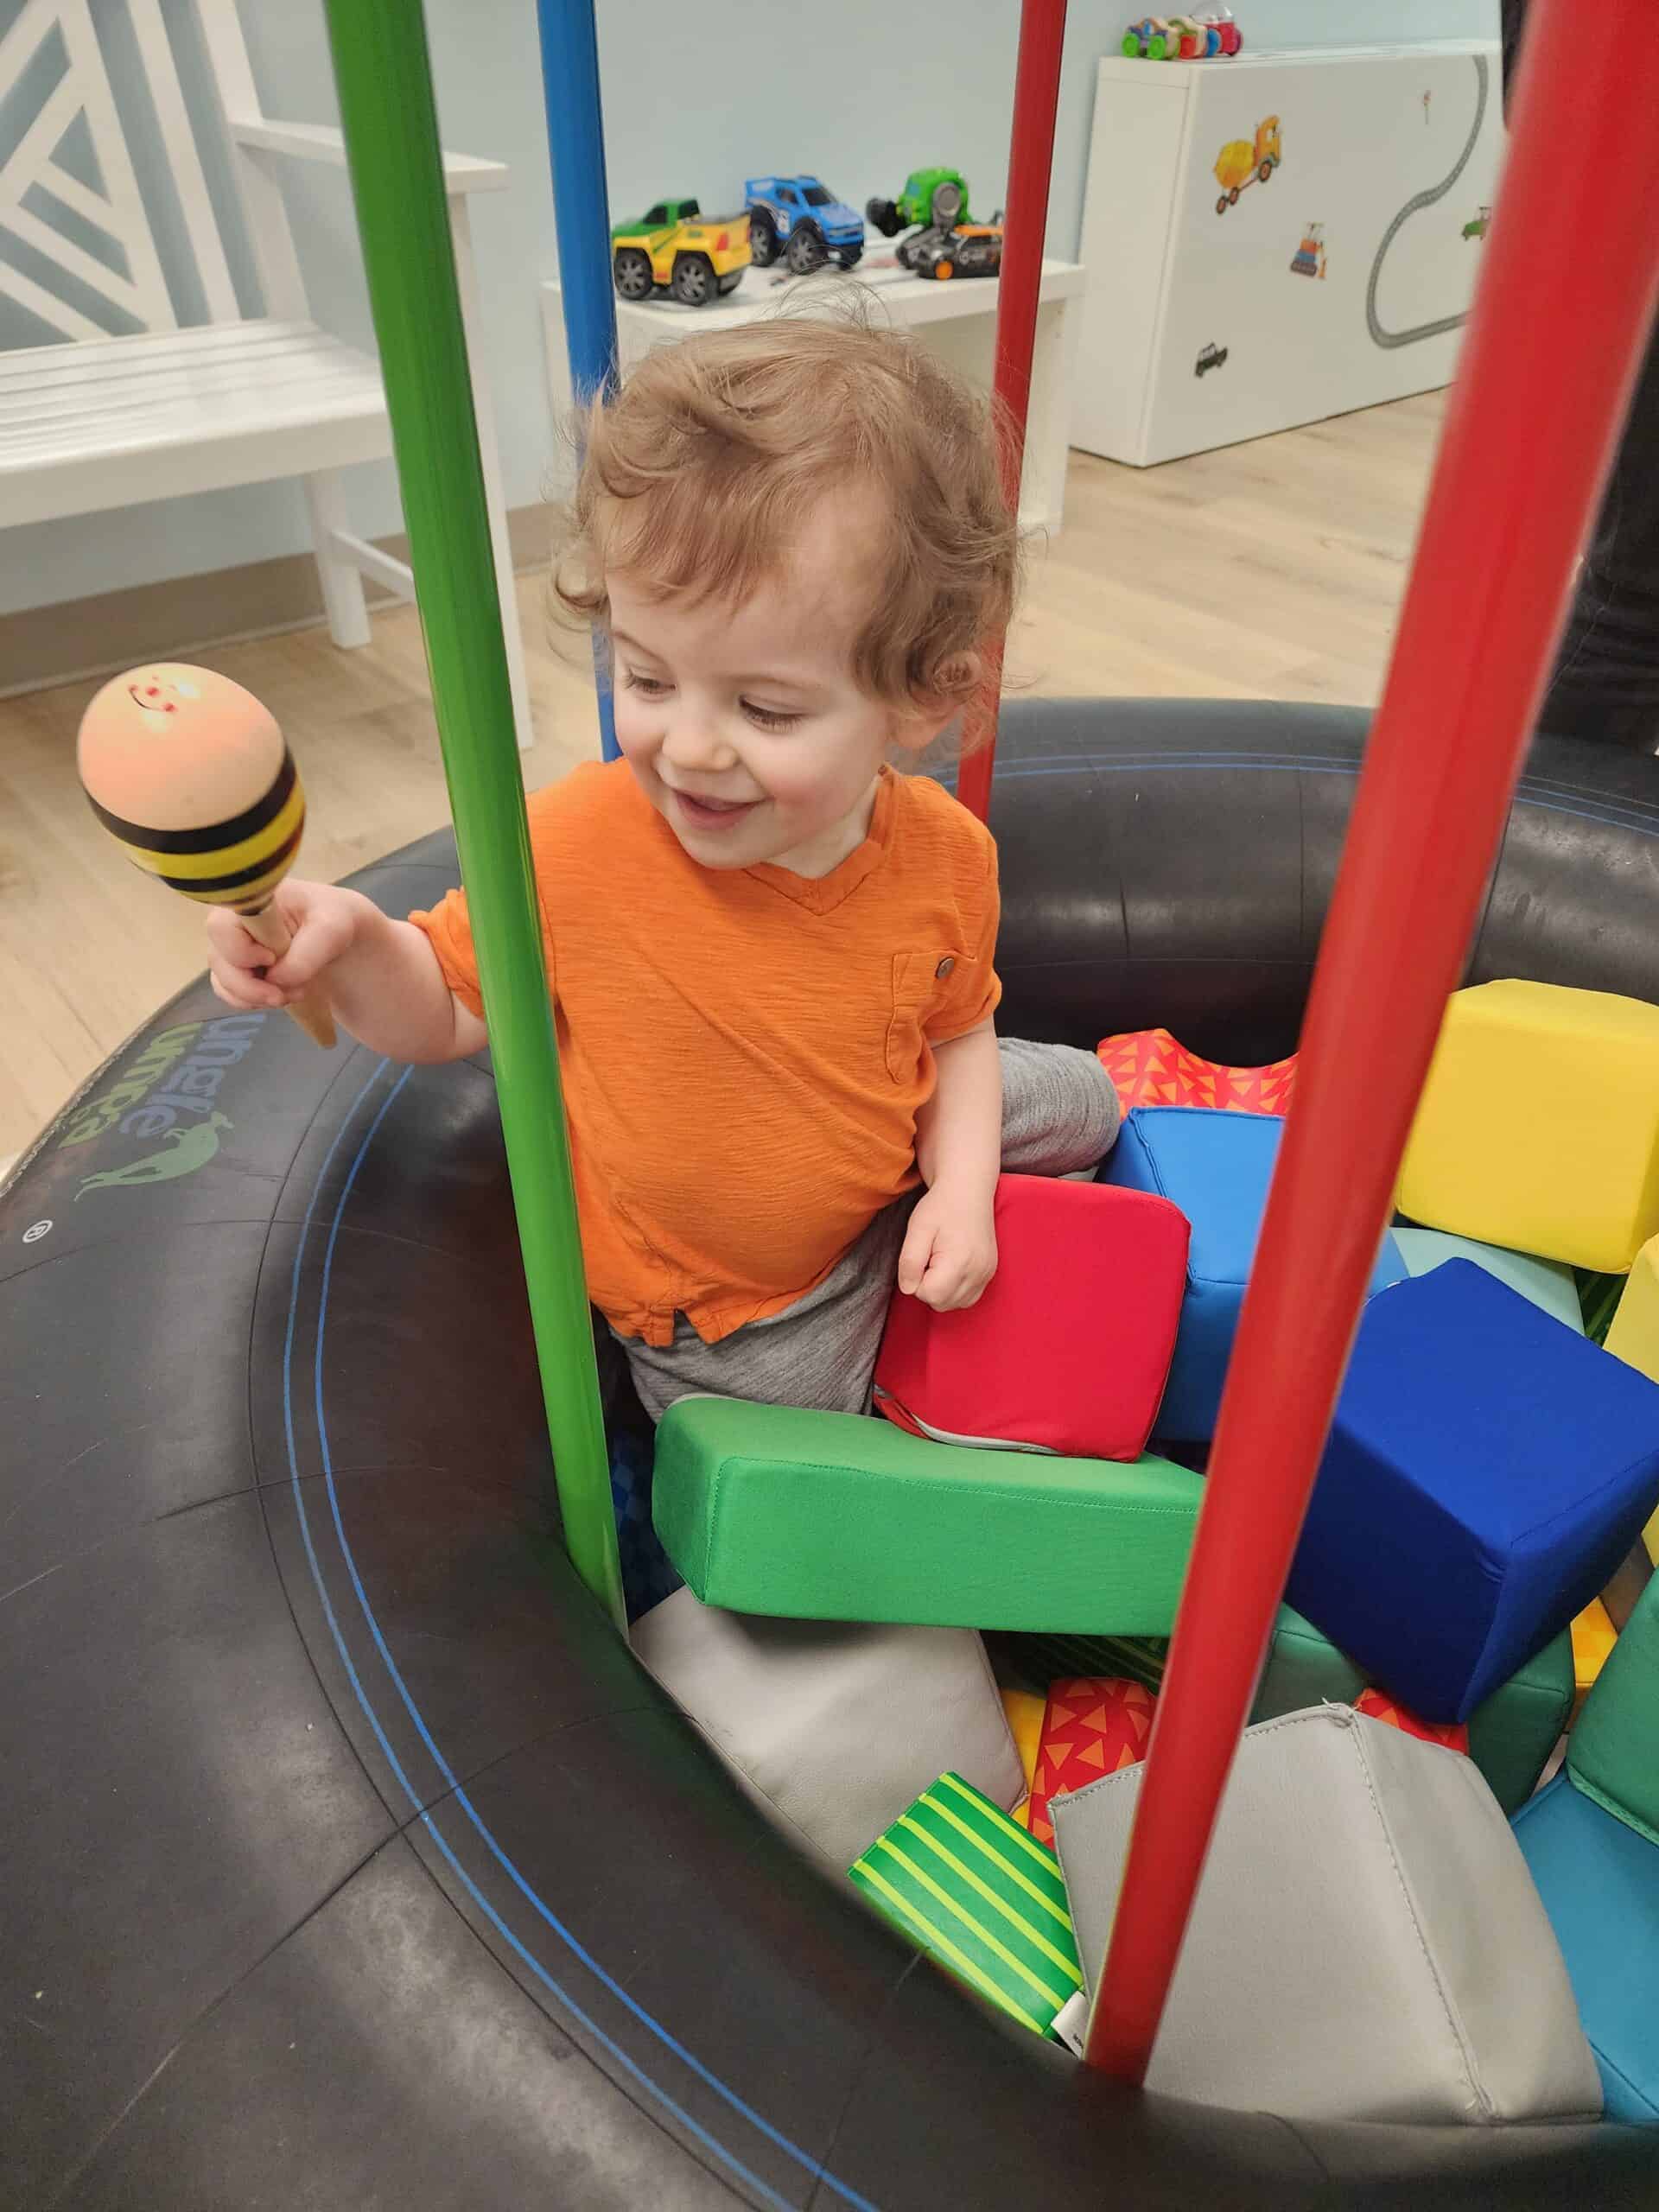 A joyful toddler with curly hair holding a toy maraca inside a colorful padded play area at Bumble Brews indoor playground in Raleigh, NC, surrounded by soft blocks and vibrant play structures.